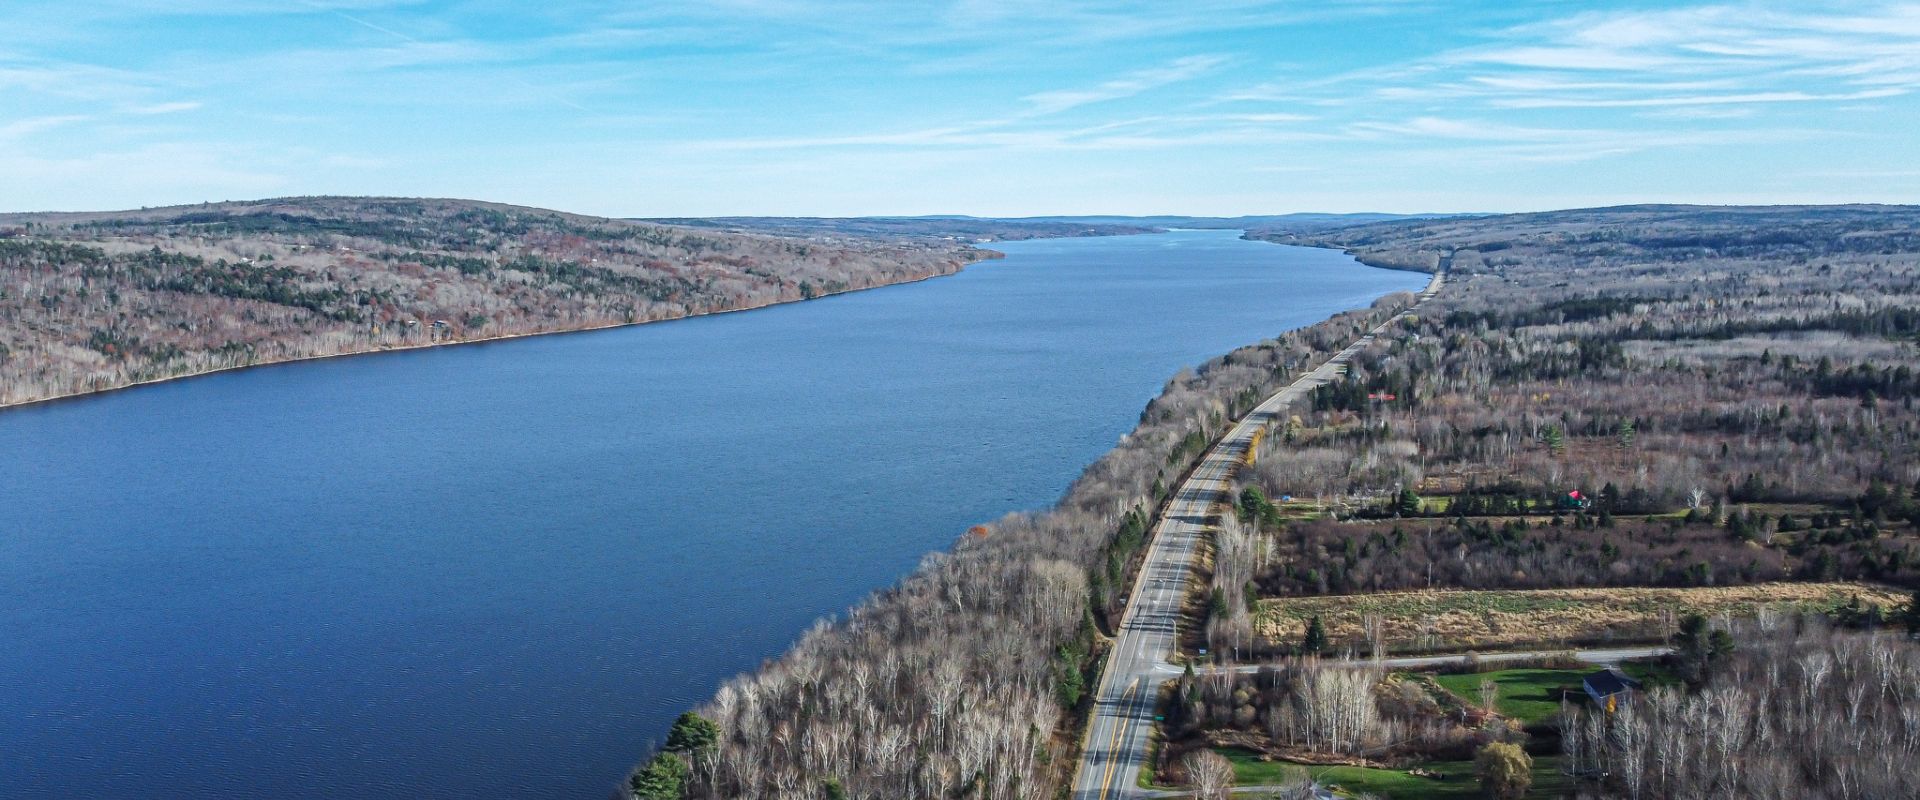 Aerial view of the Saint John River in Fredericton, New Brunswick